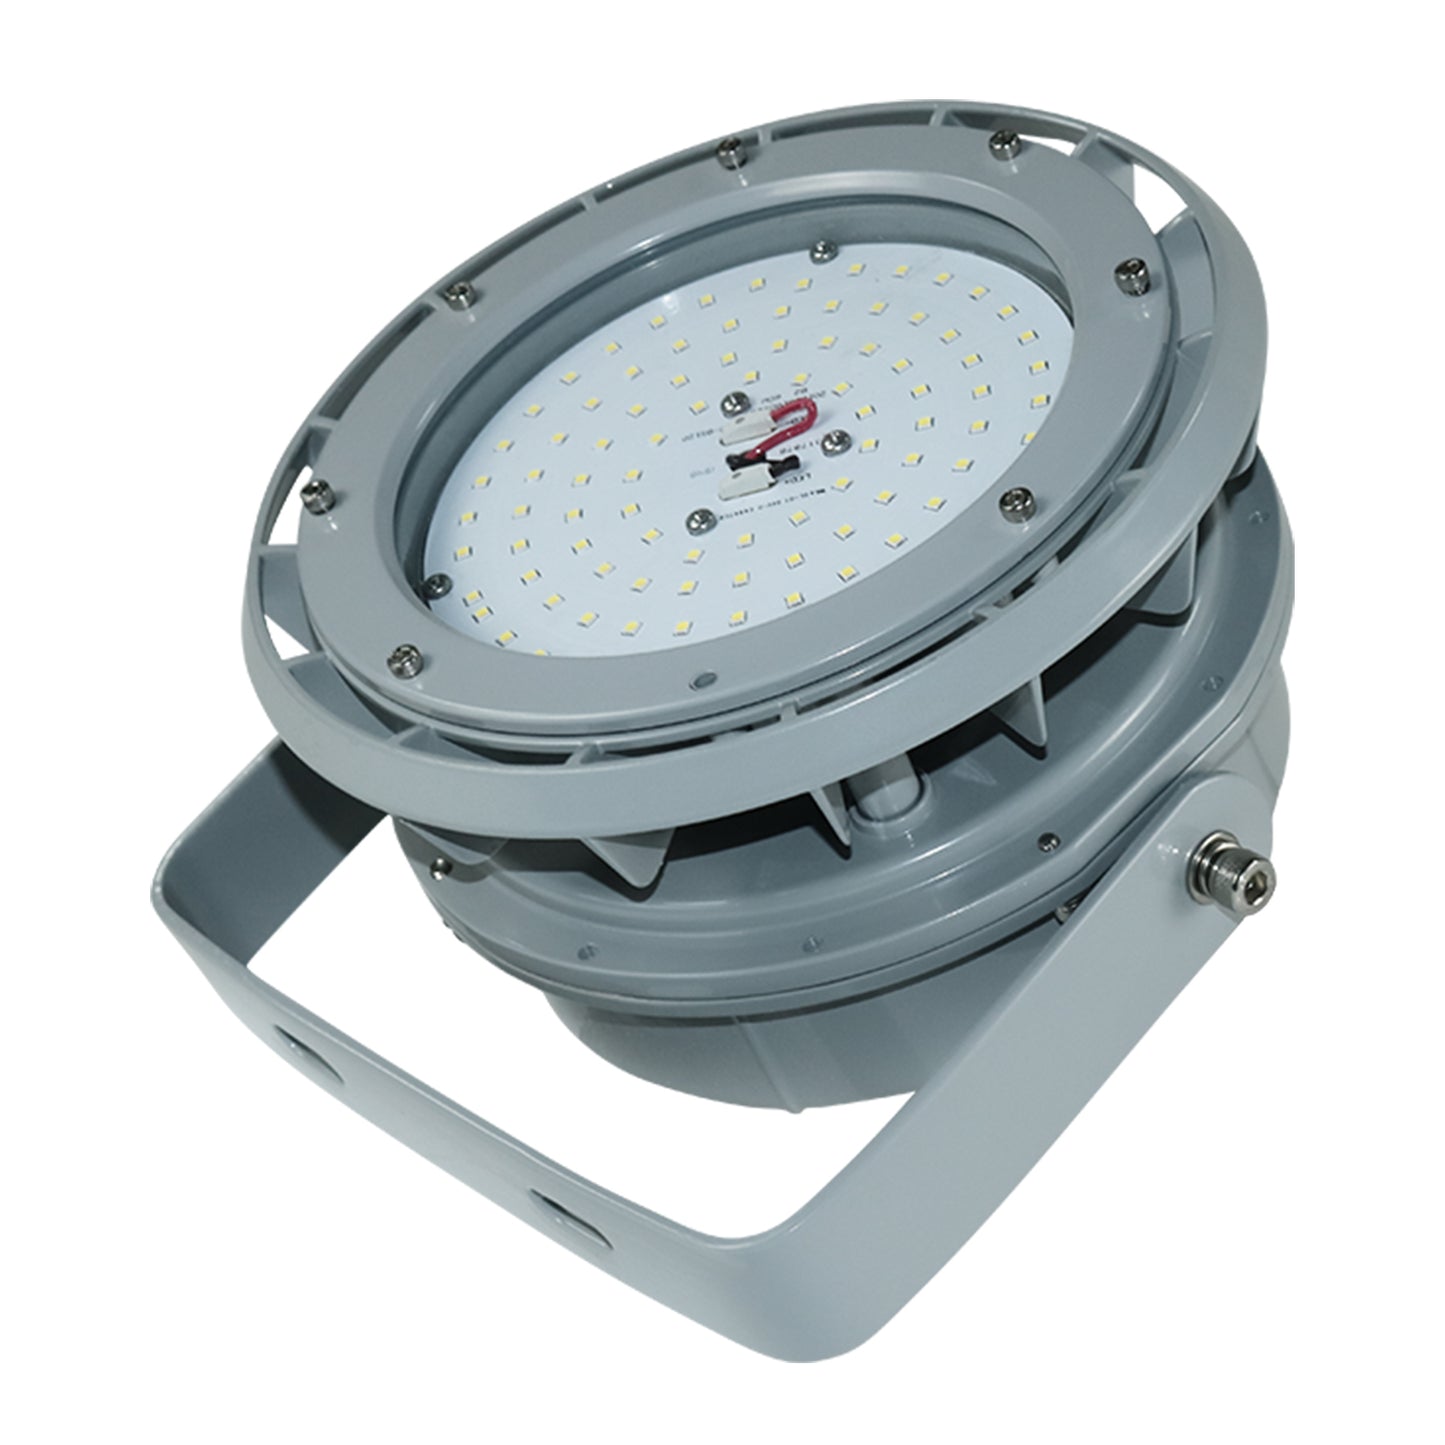 250 Watt LED Explosion Proof Lighting, B Series, Dimmable, 5000K, 35000LM, AC100-277V, IP66, Ideal for Oil & Gas Refineries, Drilling Rigs, Petrochemical Facilities